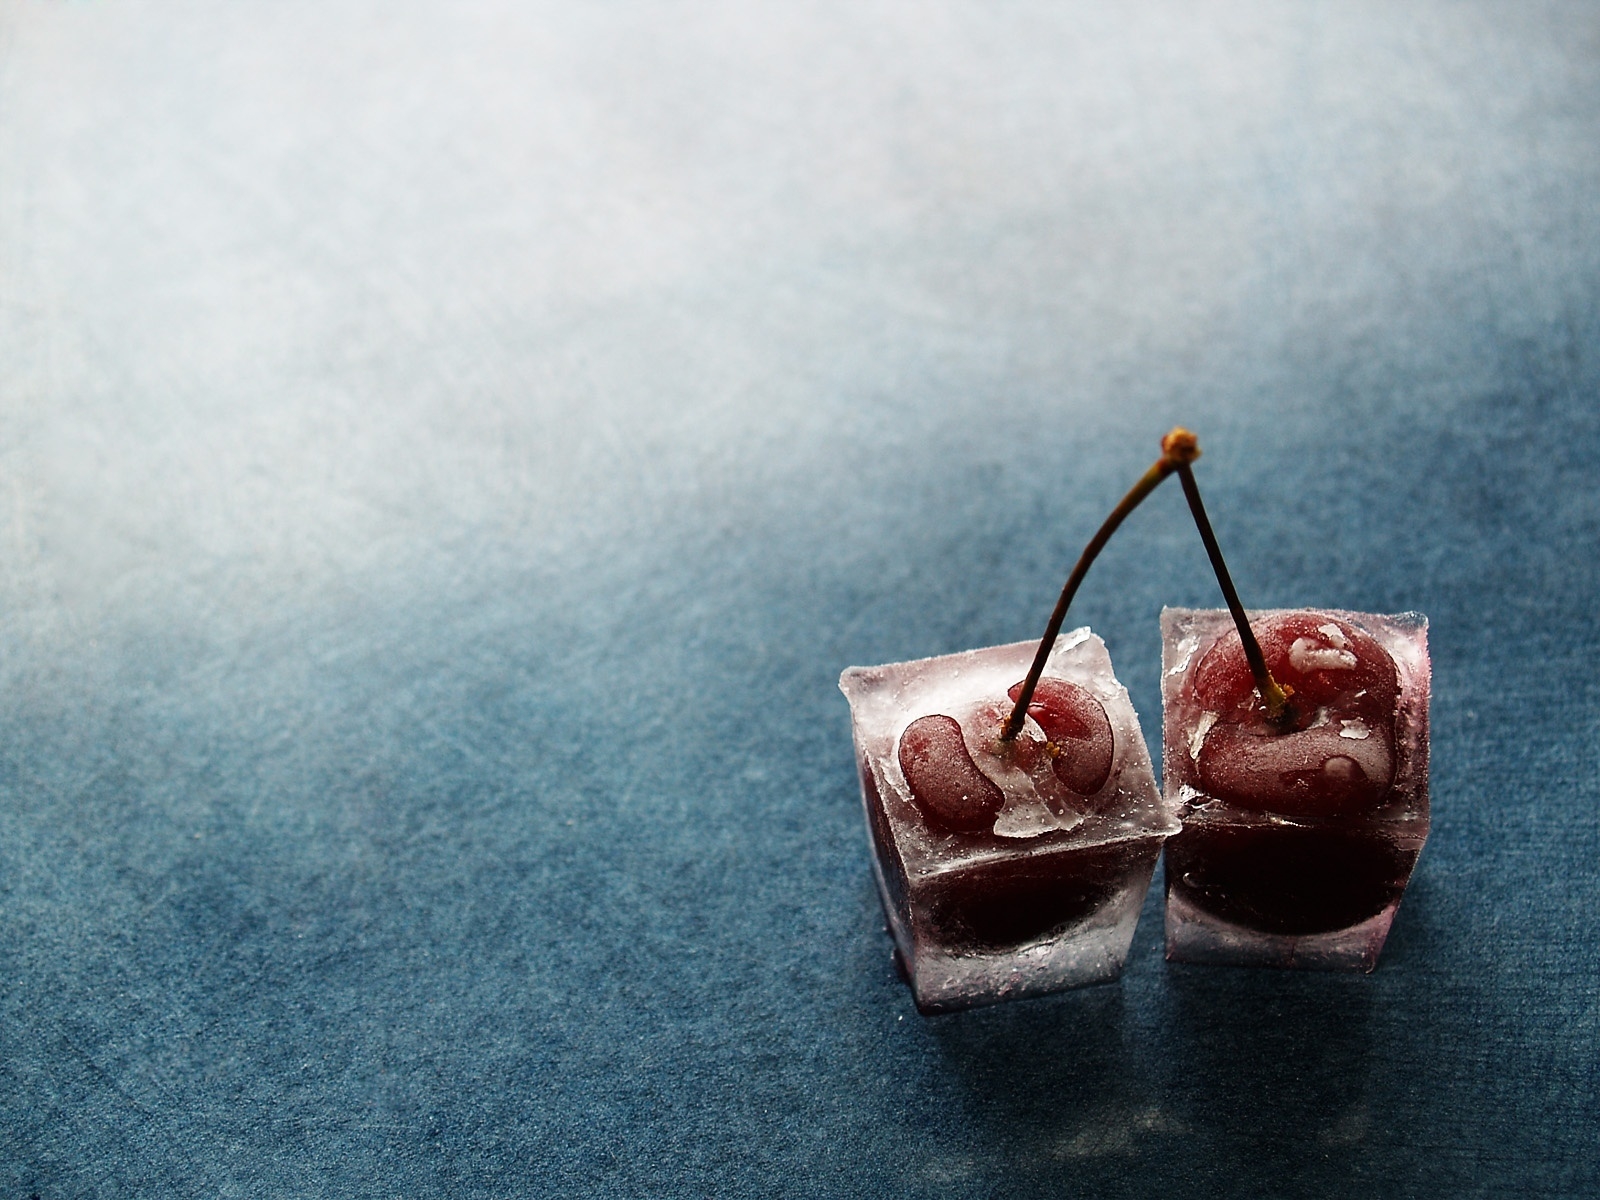 Cherries in Ice for 1600 x 1200 resolution